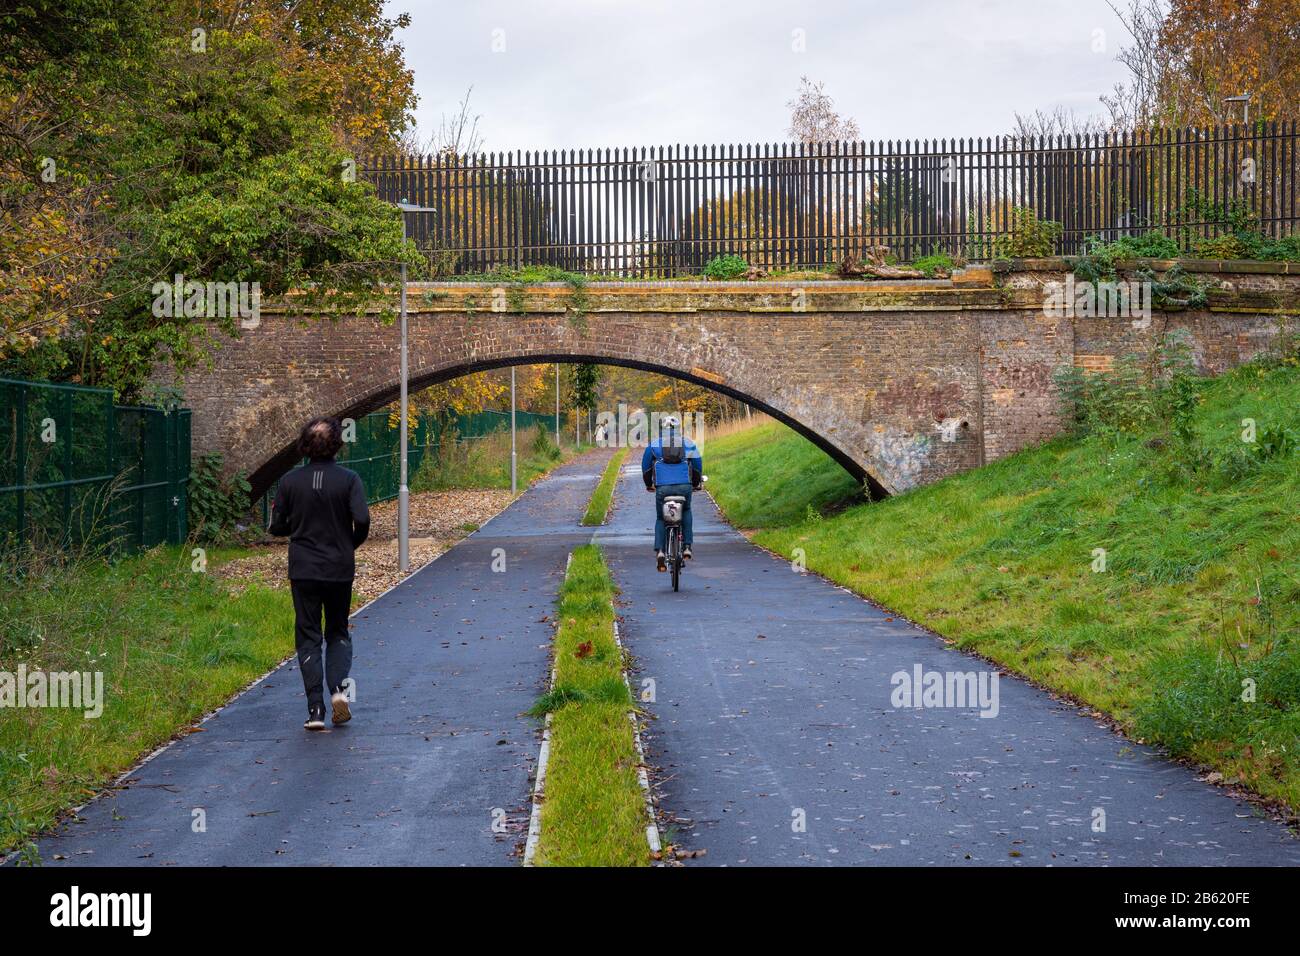 London, England, UK - November 17, 2019: Cyclists, walkers and joggers used a new 'rail trail' path and park between New Maldon and Raynes Park in sou Stock Photo